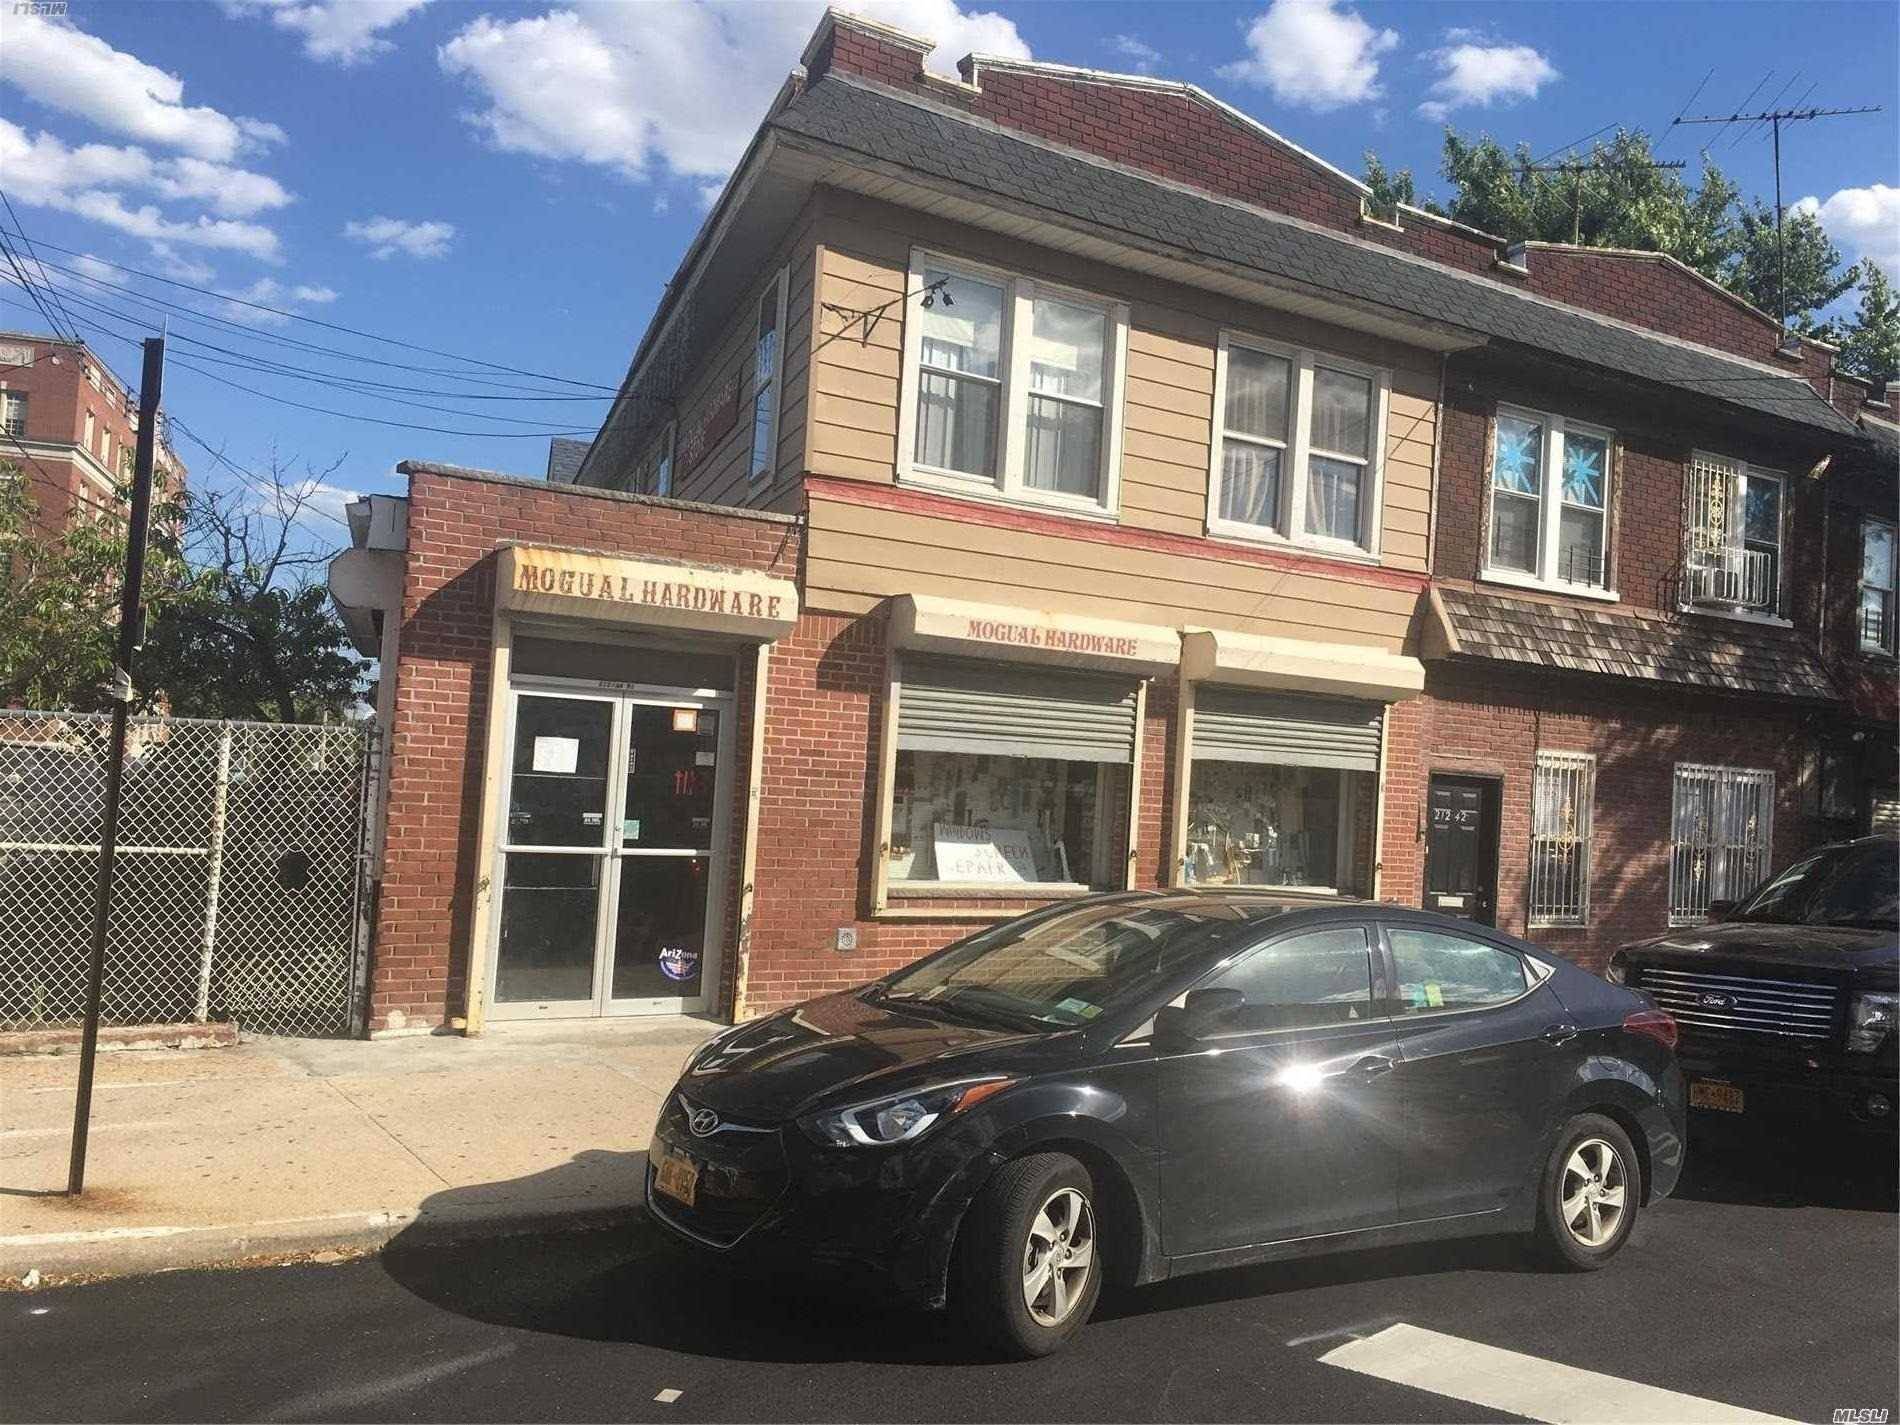 Very Motivated Seller Great Mixed Use Commercial Property With 3 Bedroom Apartment Upstairs And Private Driveway With Parking Spaces.